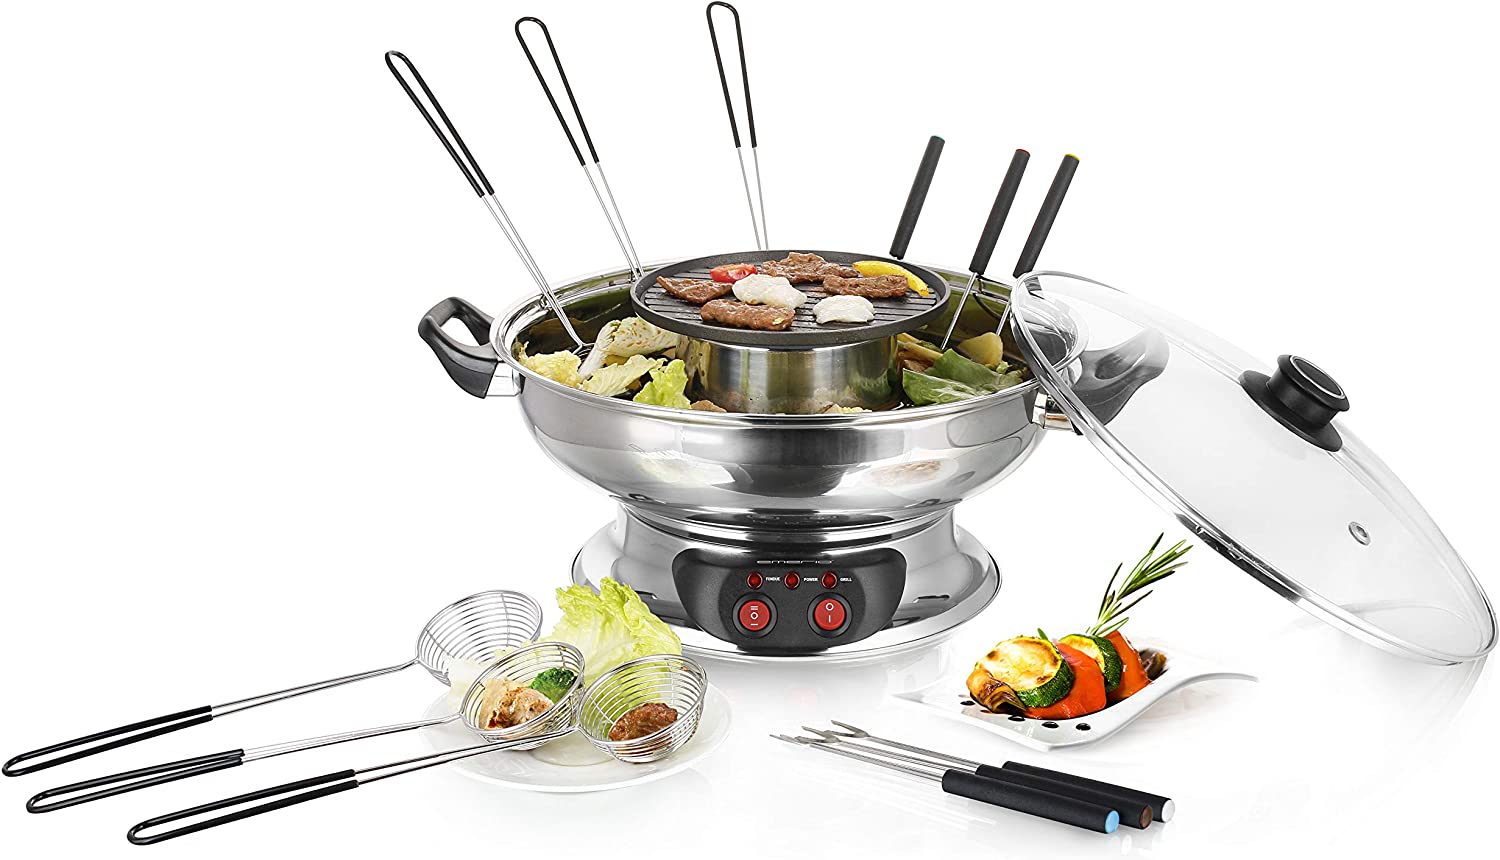 Emerio HPS-121313 Electric Hot Pot Set, Stainless Steel